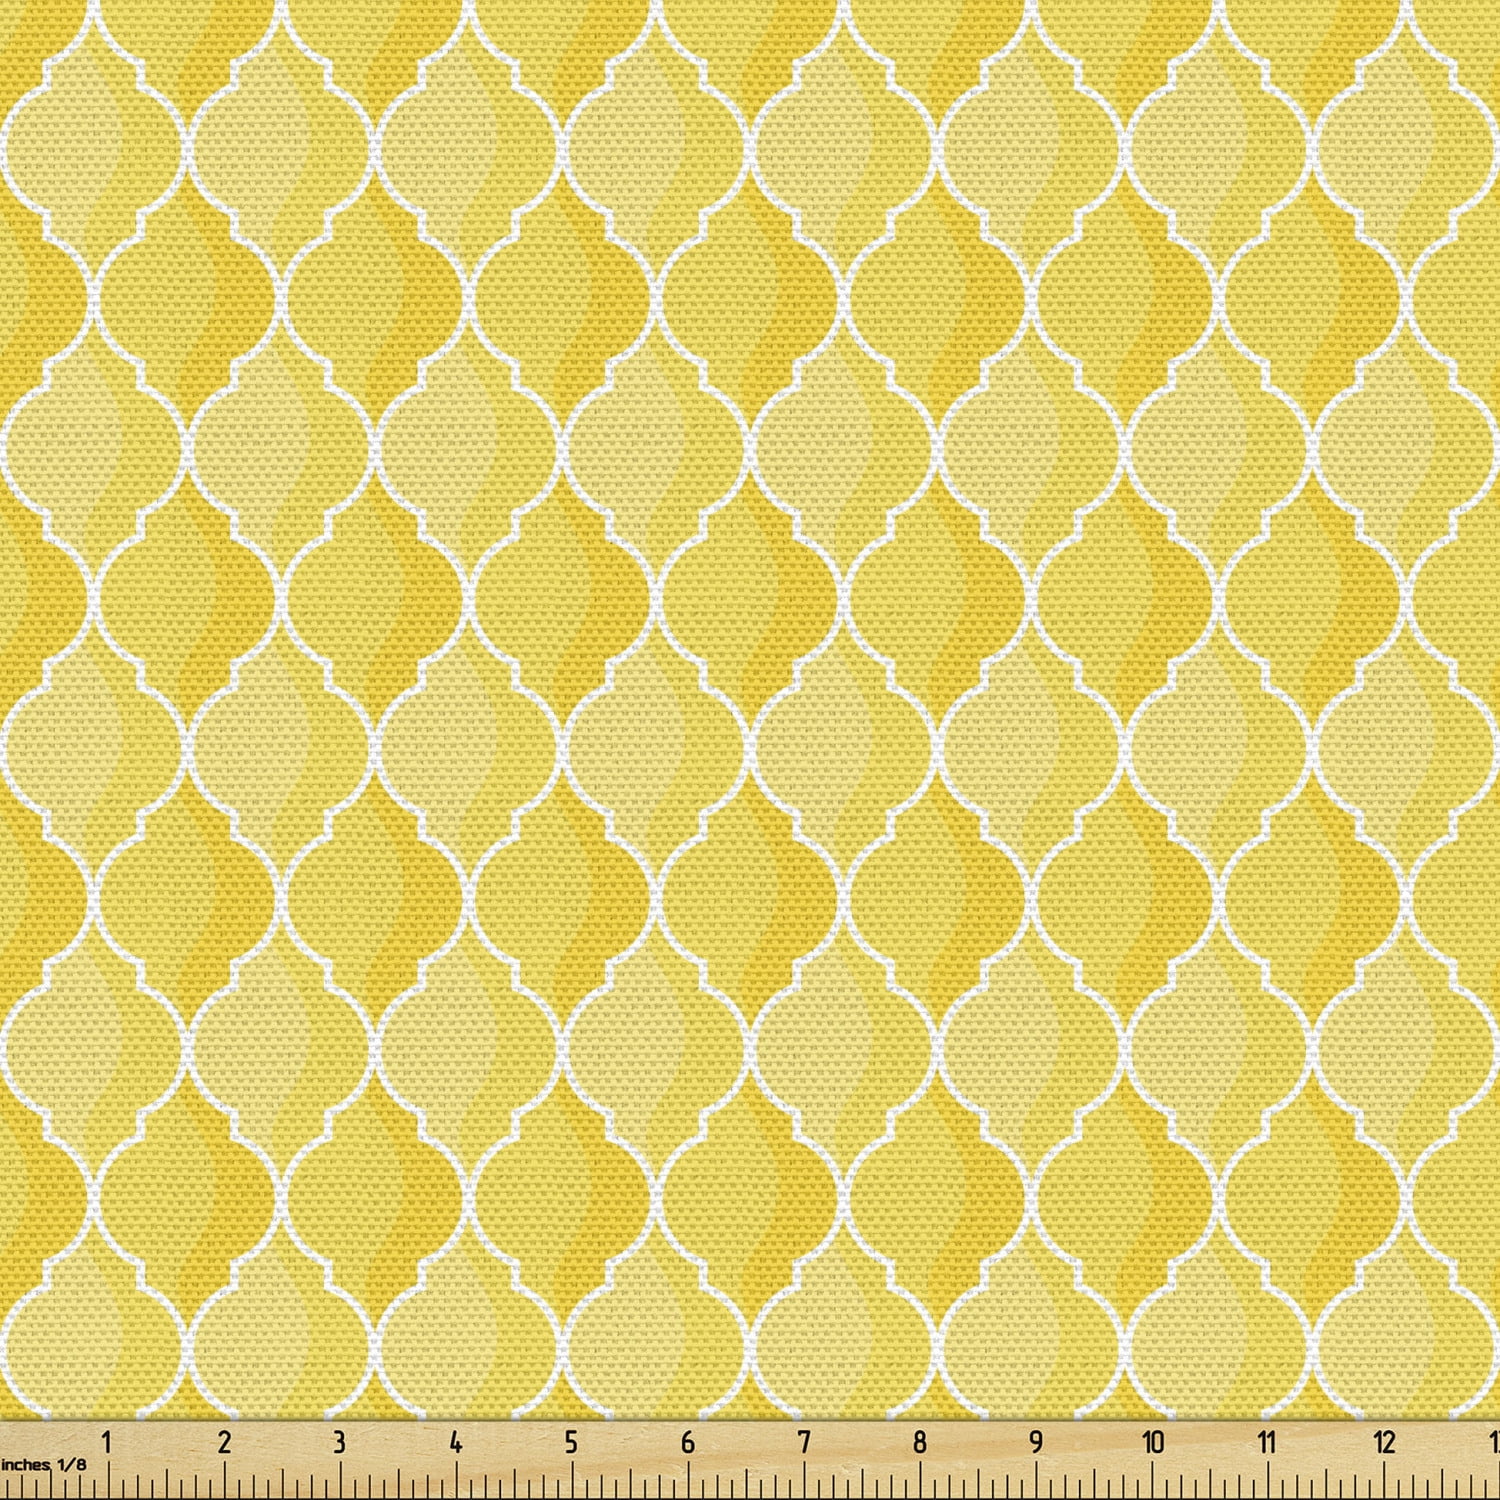 Choose Your Size Trellis Pattern in yellow with white 100% Cotton Fabric Homemade in Texas Sunny Set of 2 Print Napkins Hemmed Squares